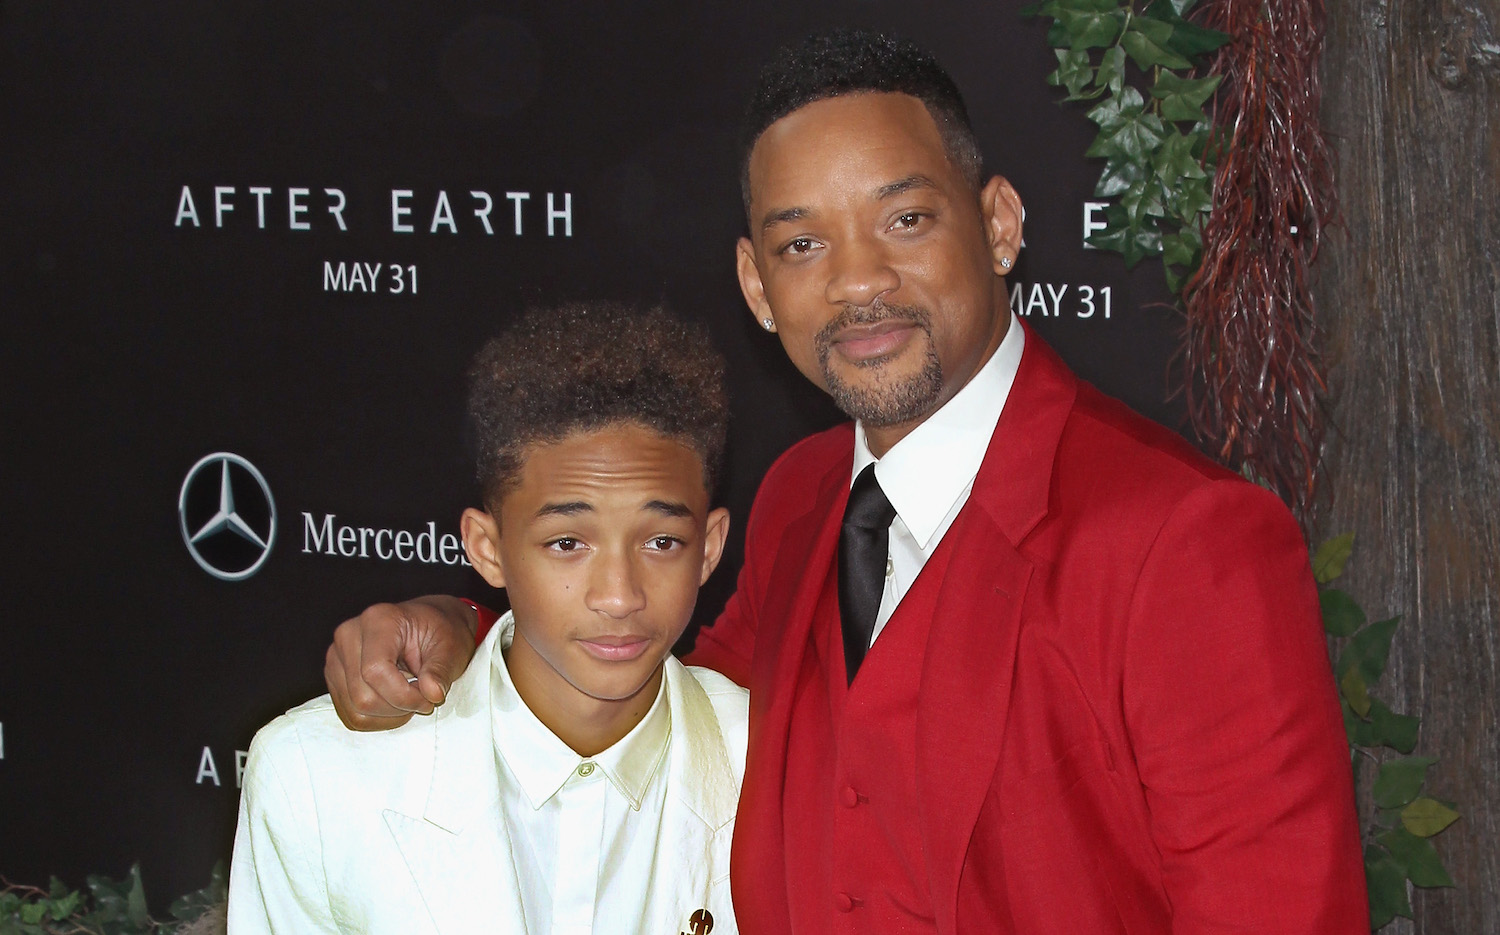 Jaden Smith and Will Smith attend the 'After Earth' premiere at the Ziegfeld Theater on May 29, 2013